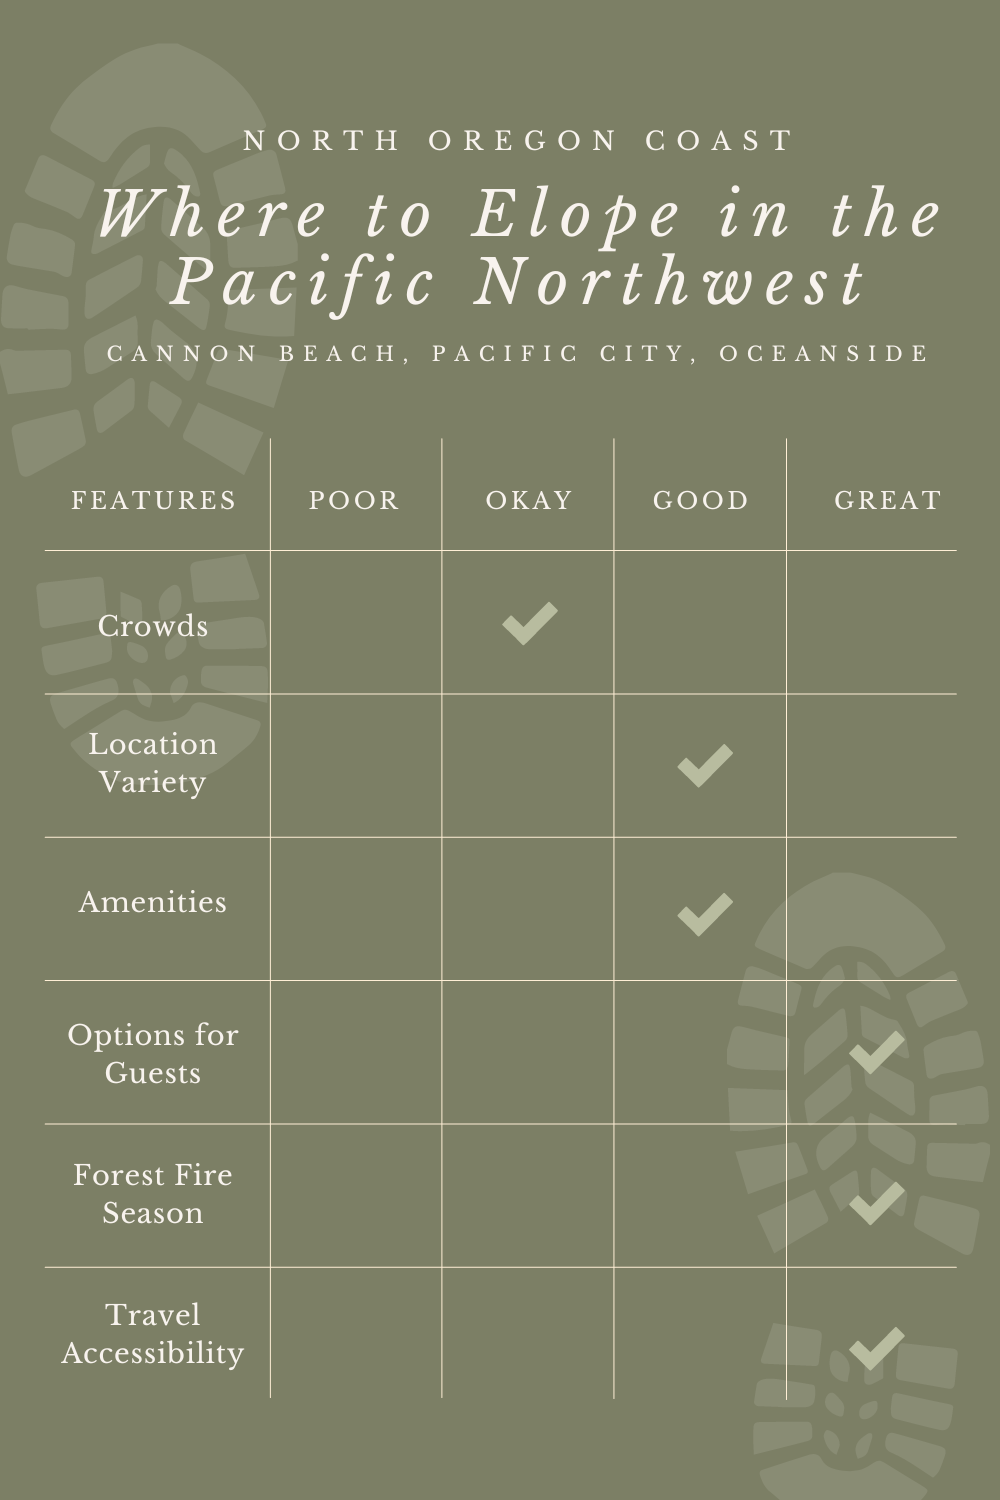 Where to elope in the Pacific Northwest - North Oregon Coast graphic